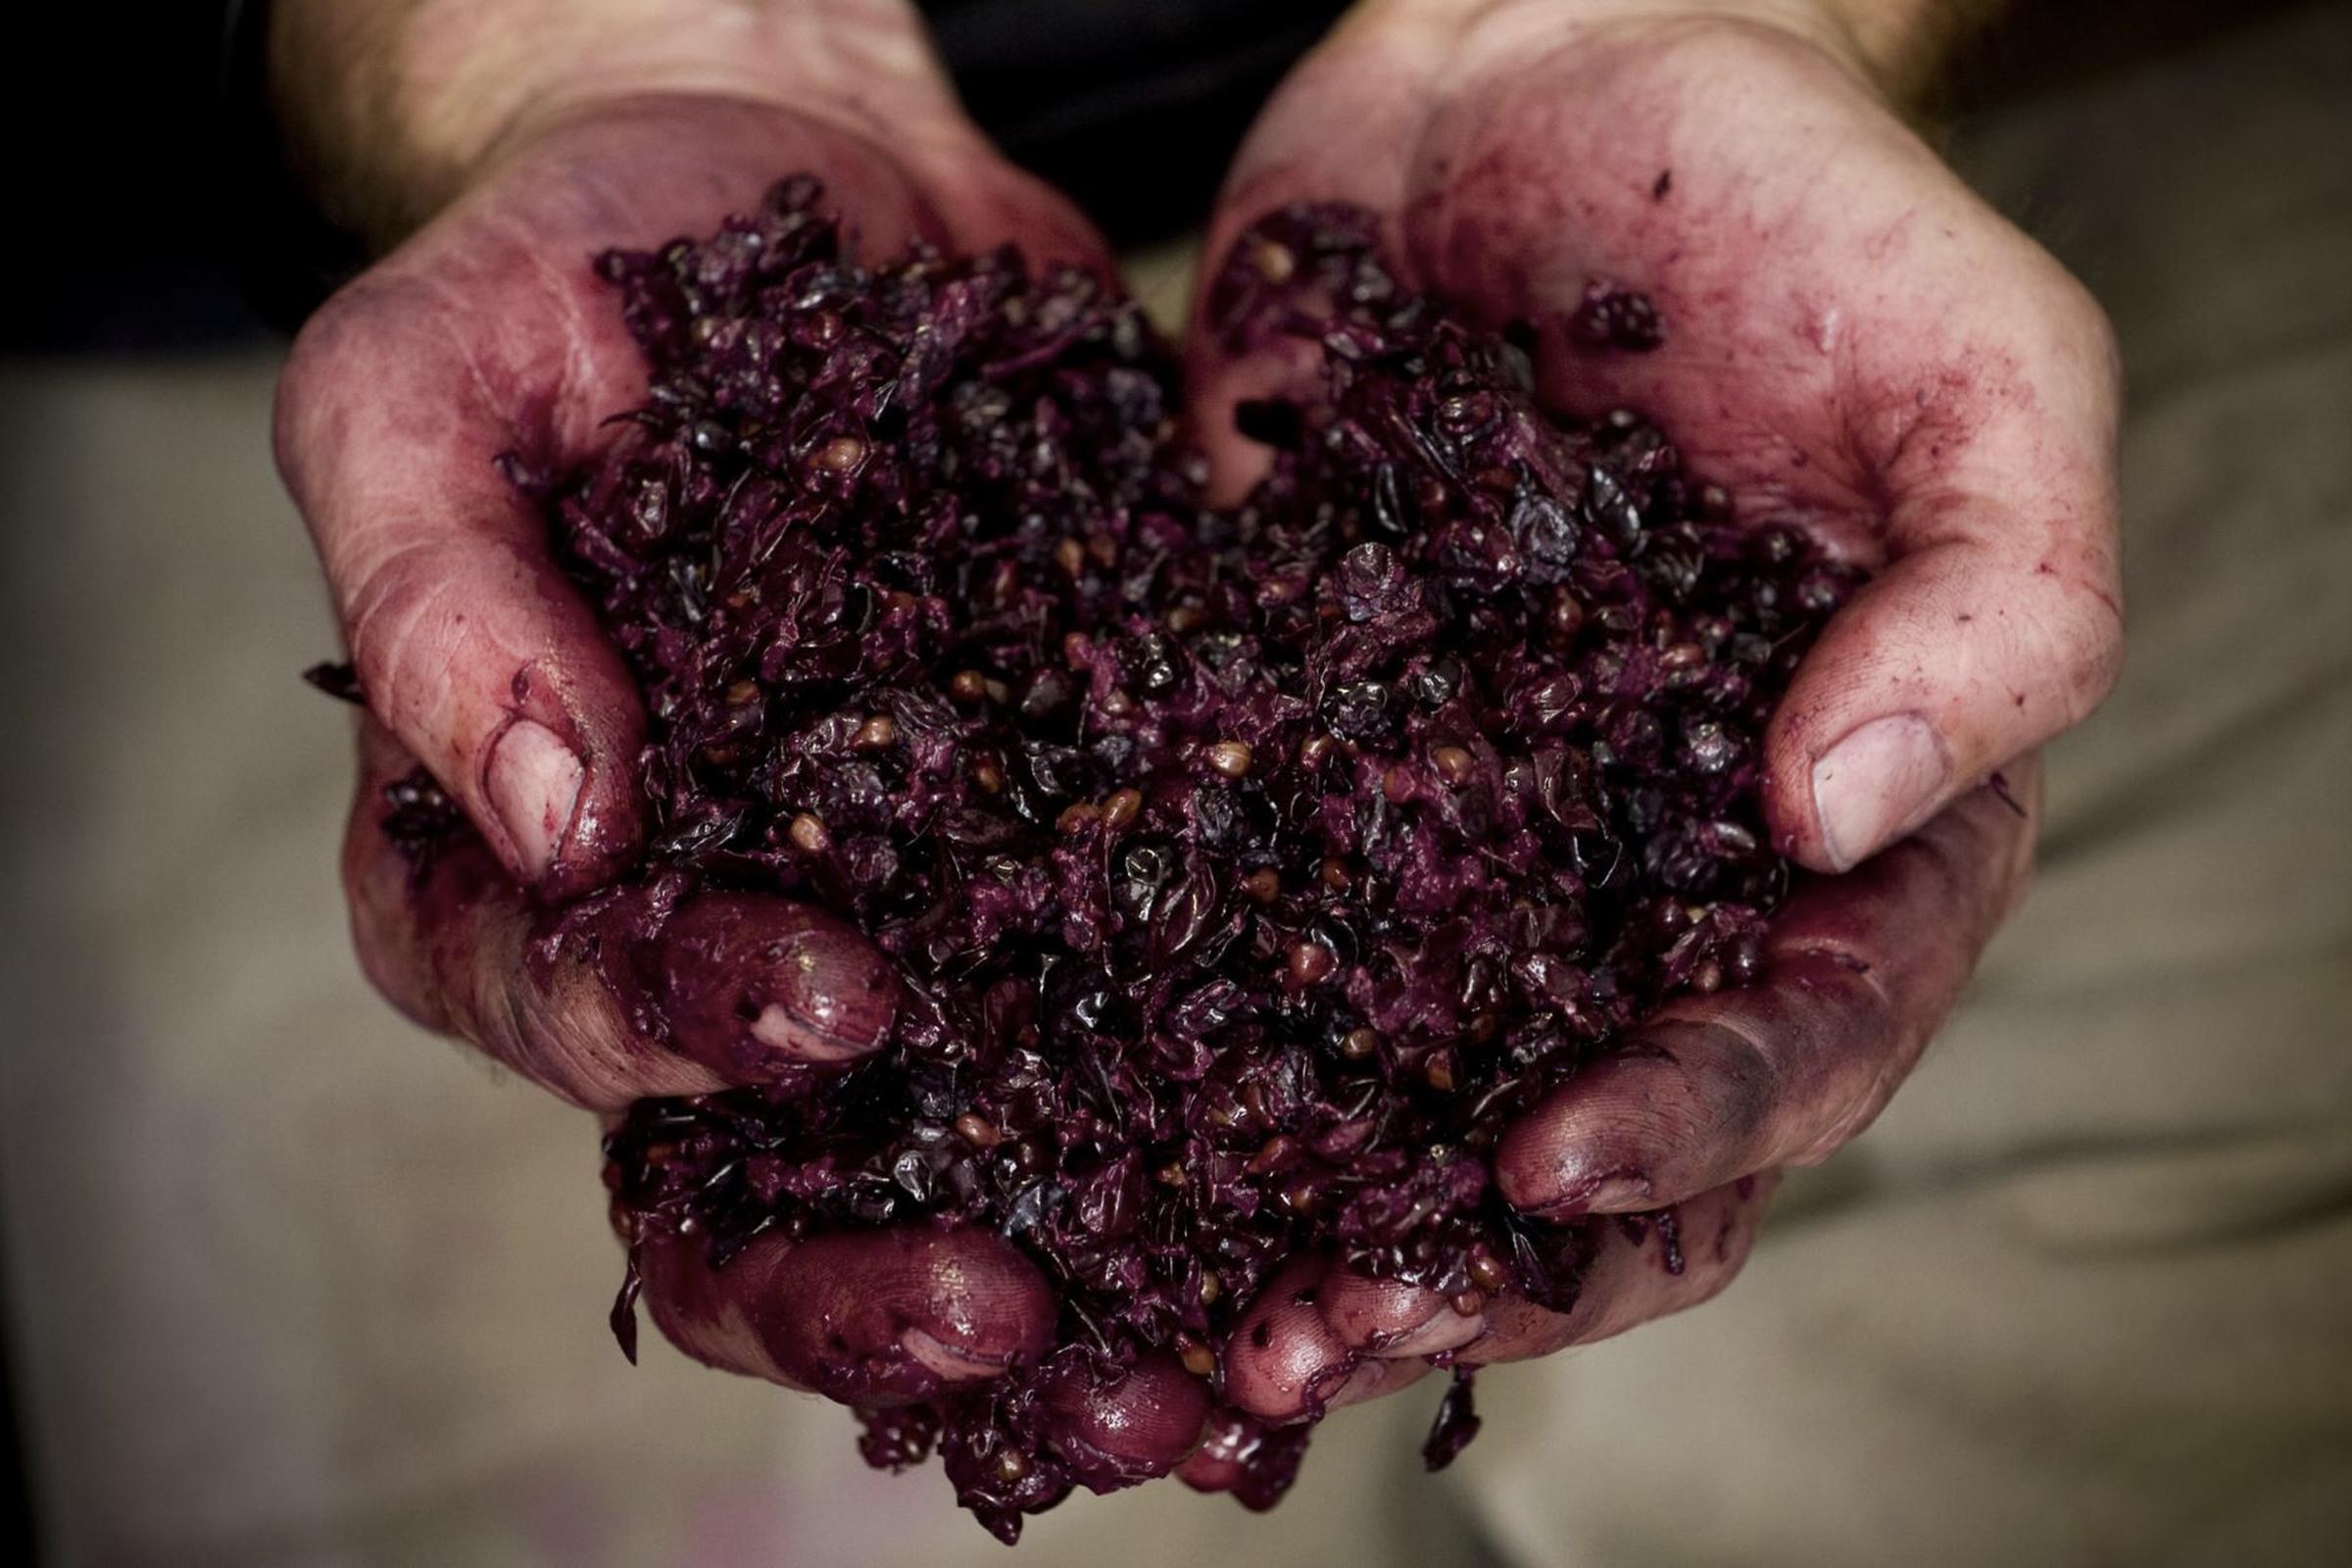 https://a.storyblok.com/f/105614/1818x1212/17d42d6dae/gemtree-mikes-hands-with-grapes.jpg